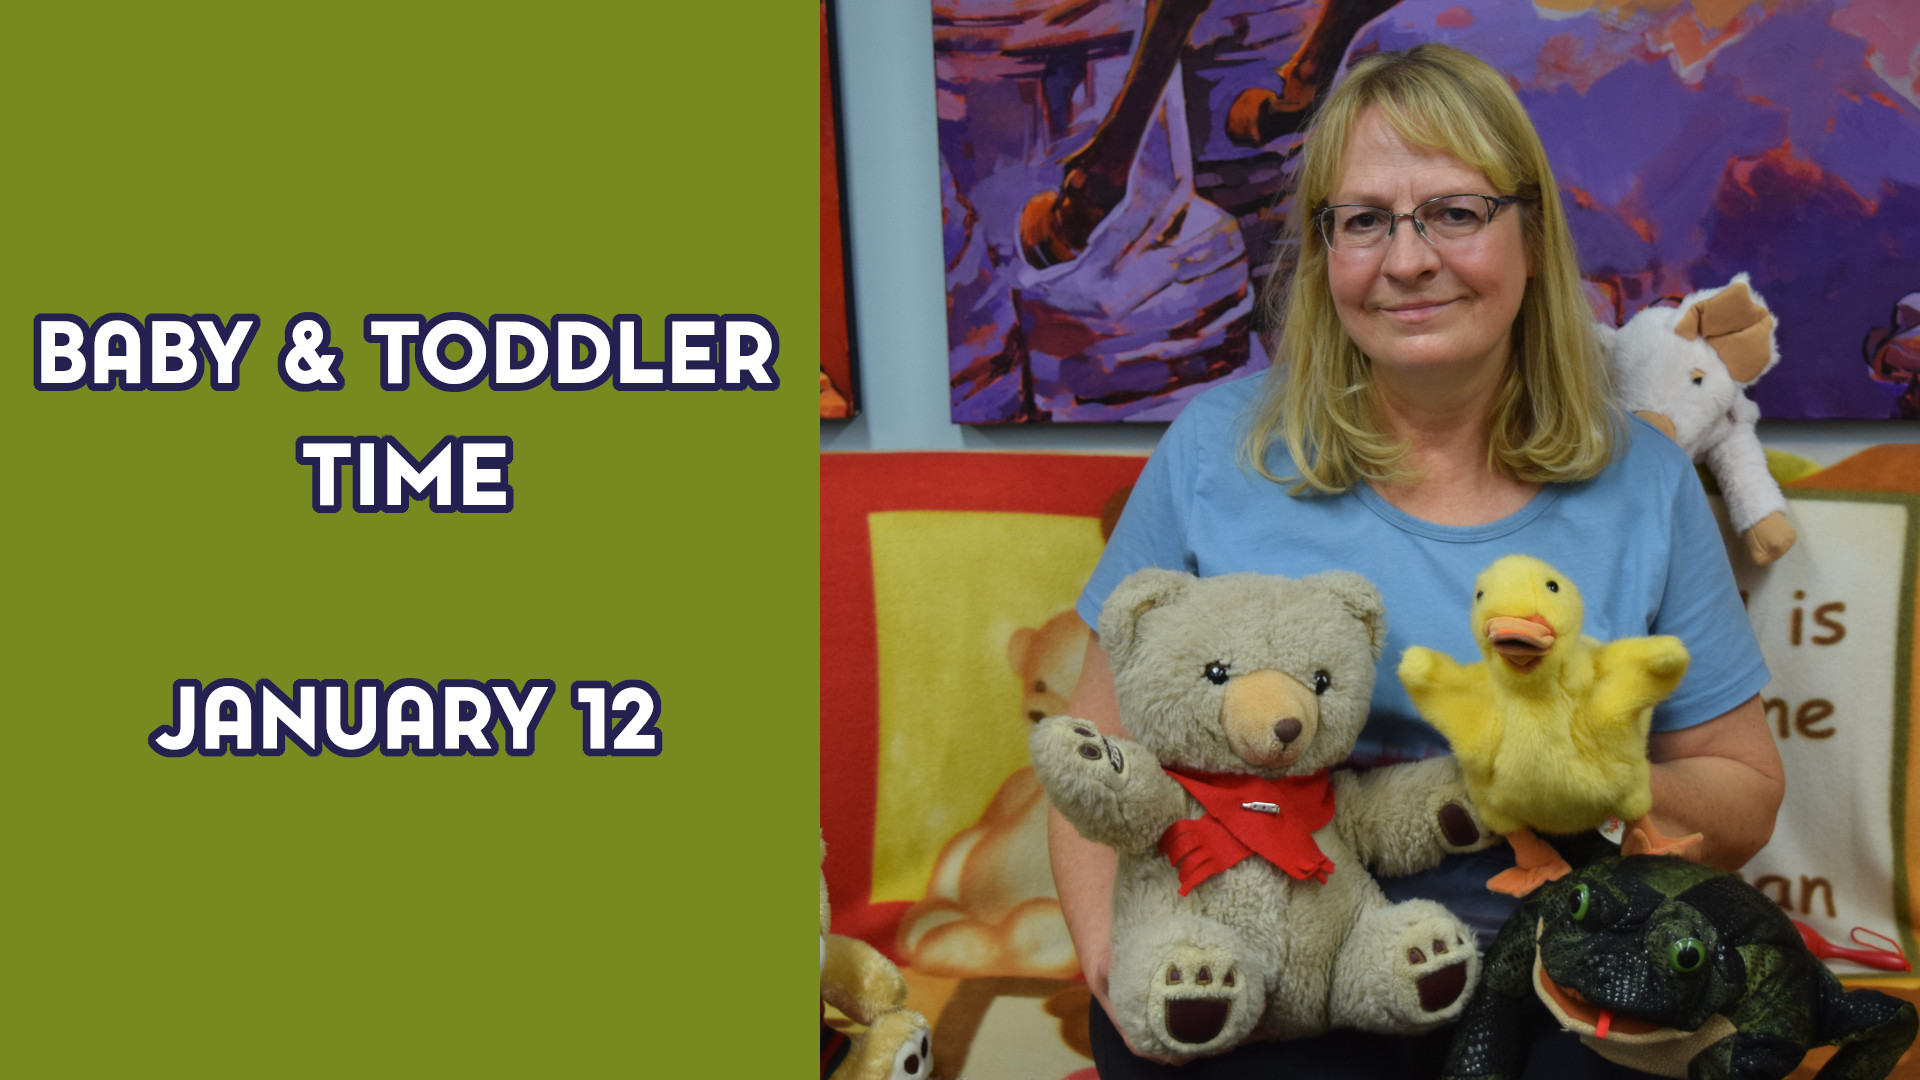 A woman holds stuffed animals next to the text "Baby and Toddler Time January 12"